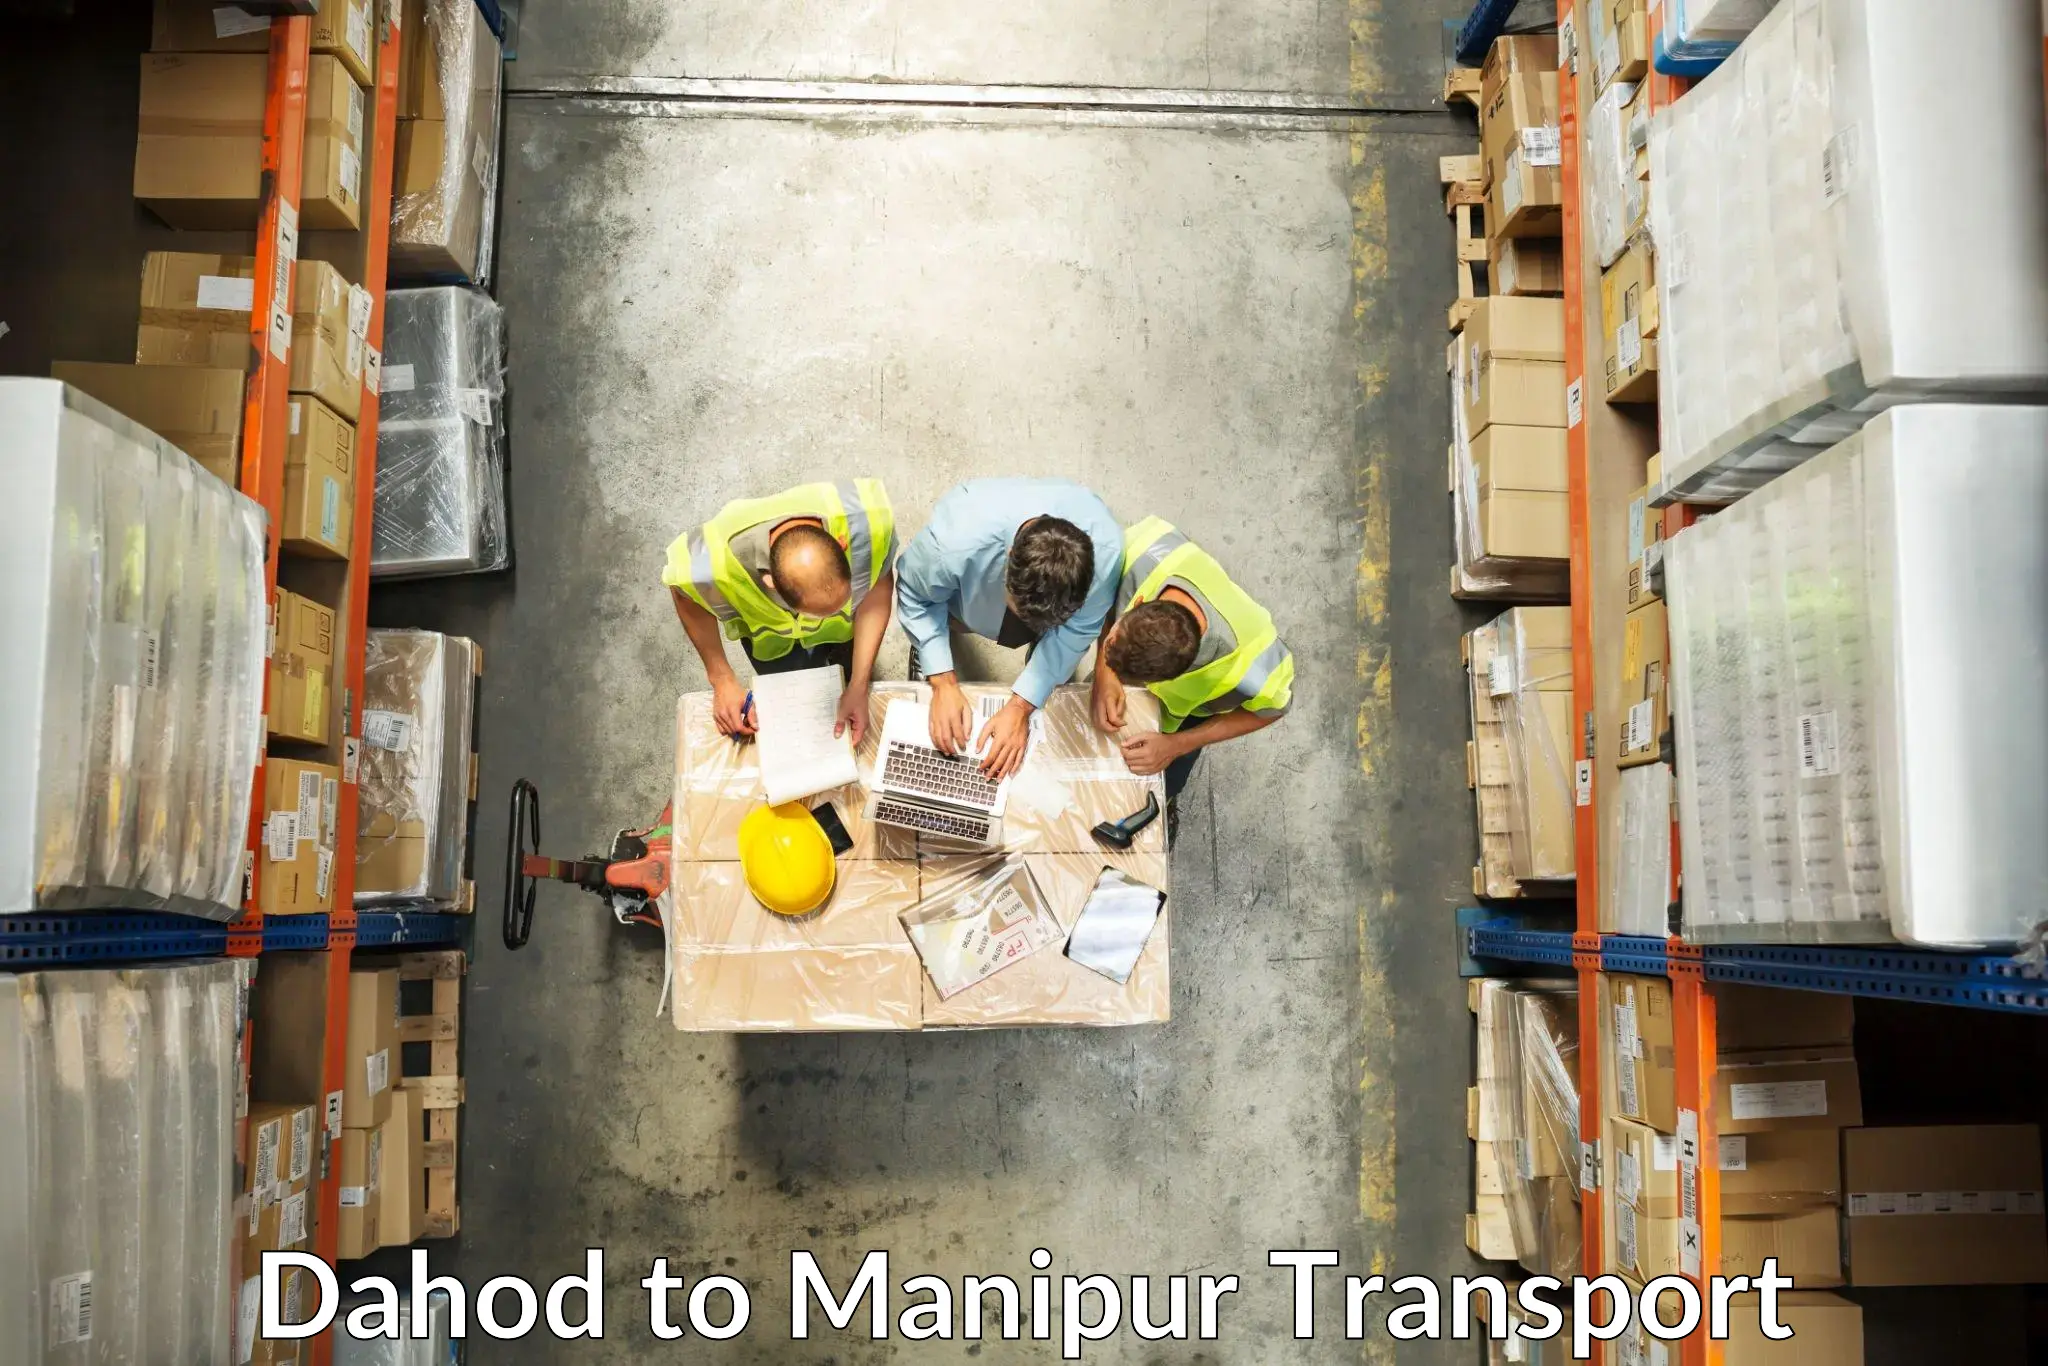 Container transport service Dahod to Manipur